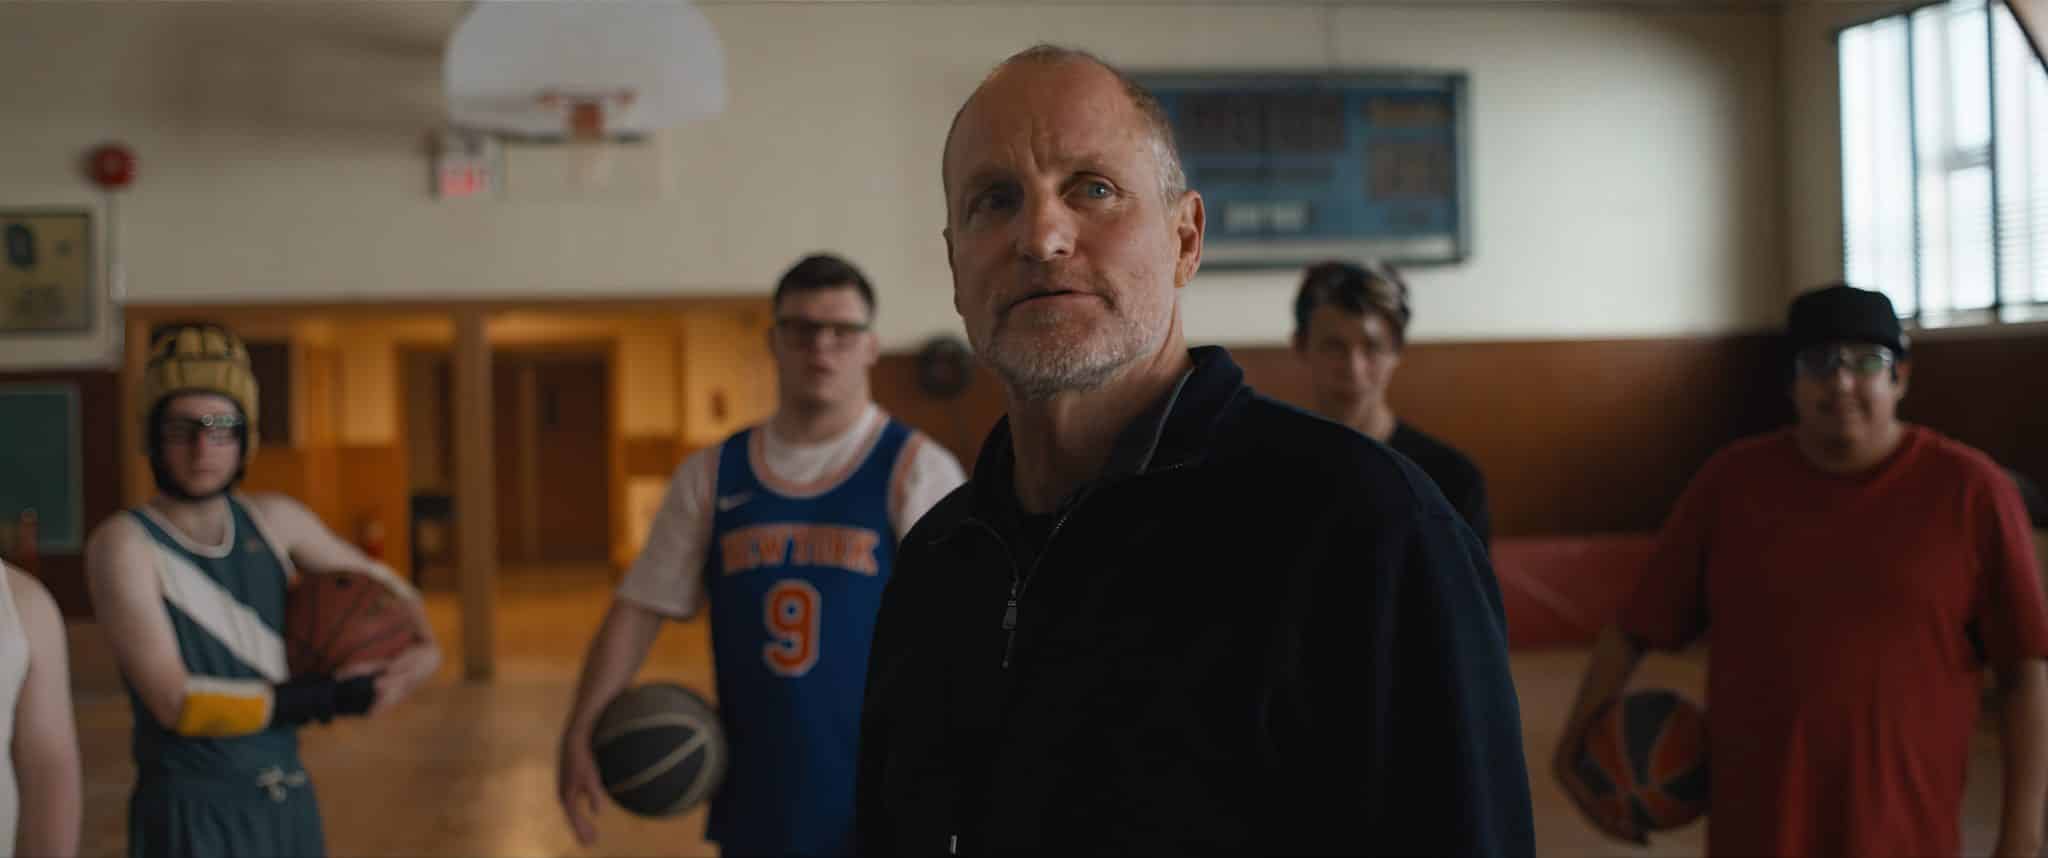 New trailer for heartwarming basketballthemed 'Champions' with Woody